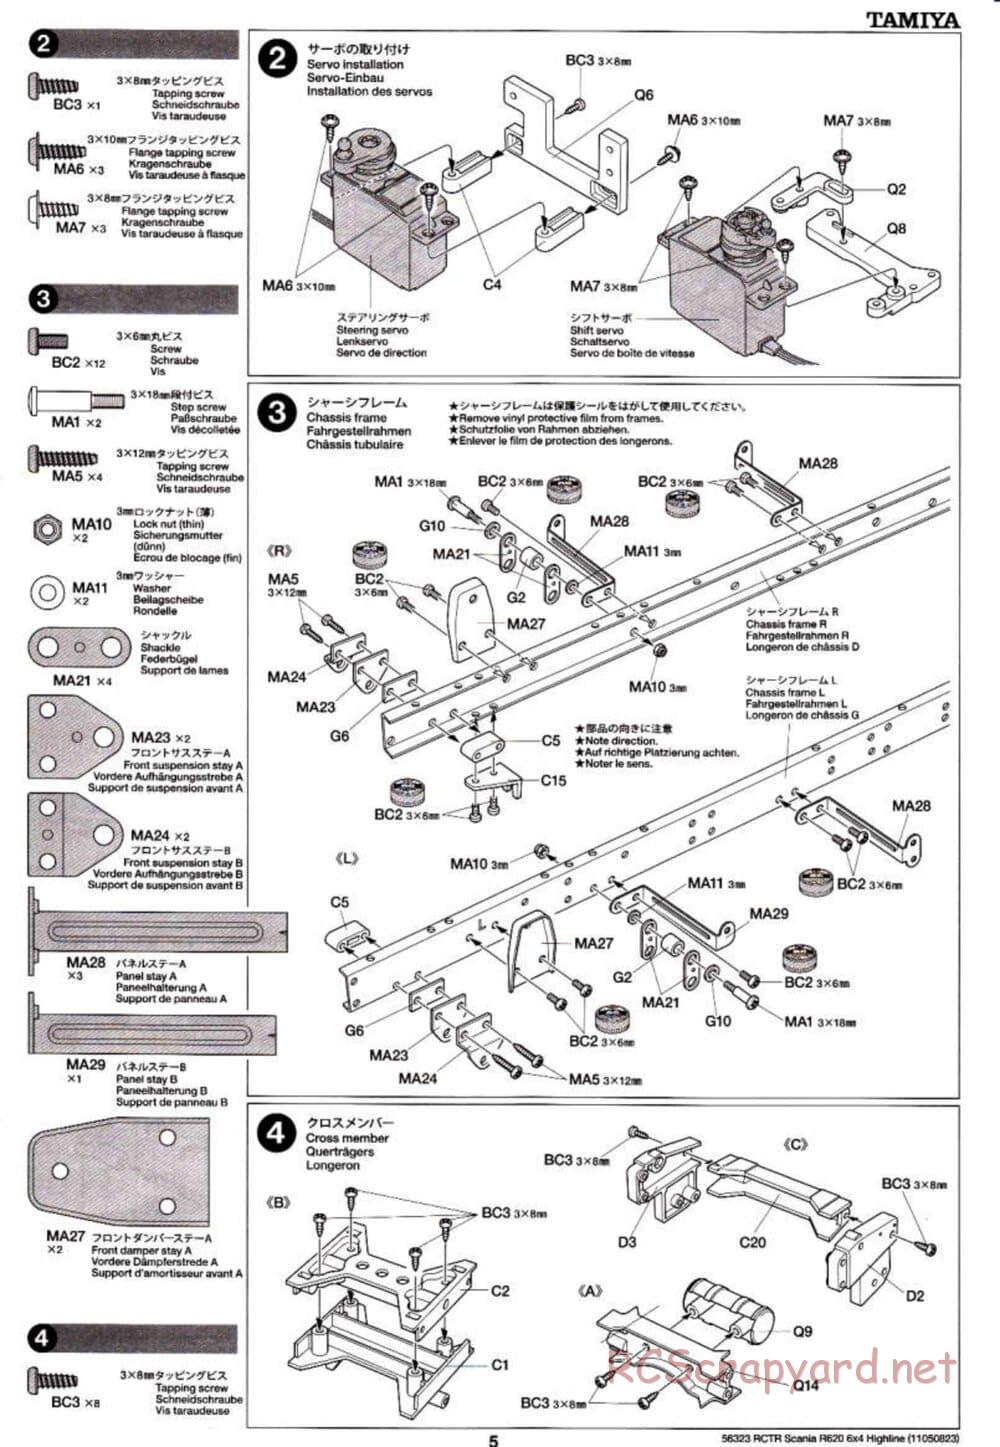 Tamiya - Scania R620 6x4 Highline Tractor Truck Chassis - Manual - Page 5